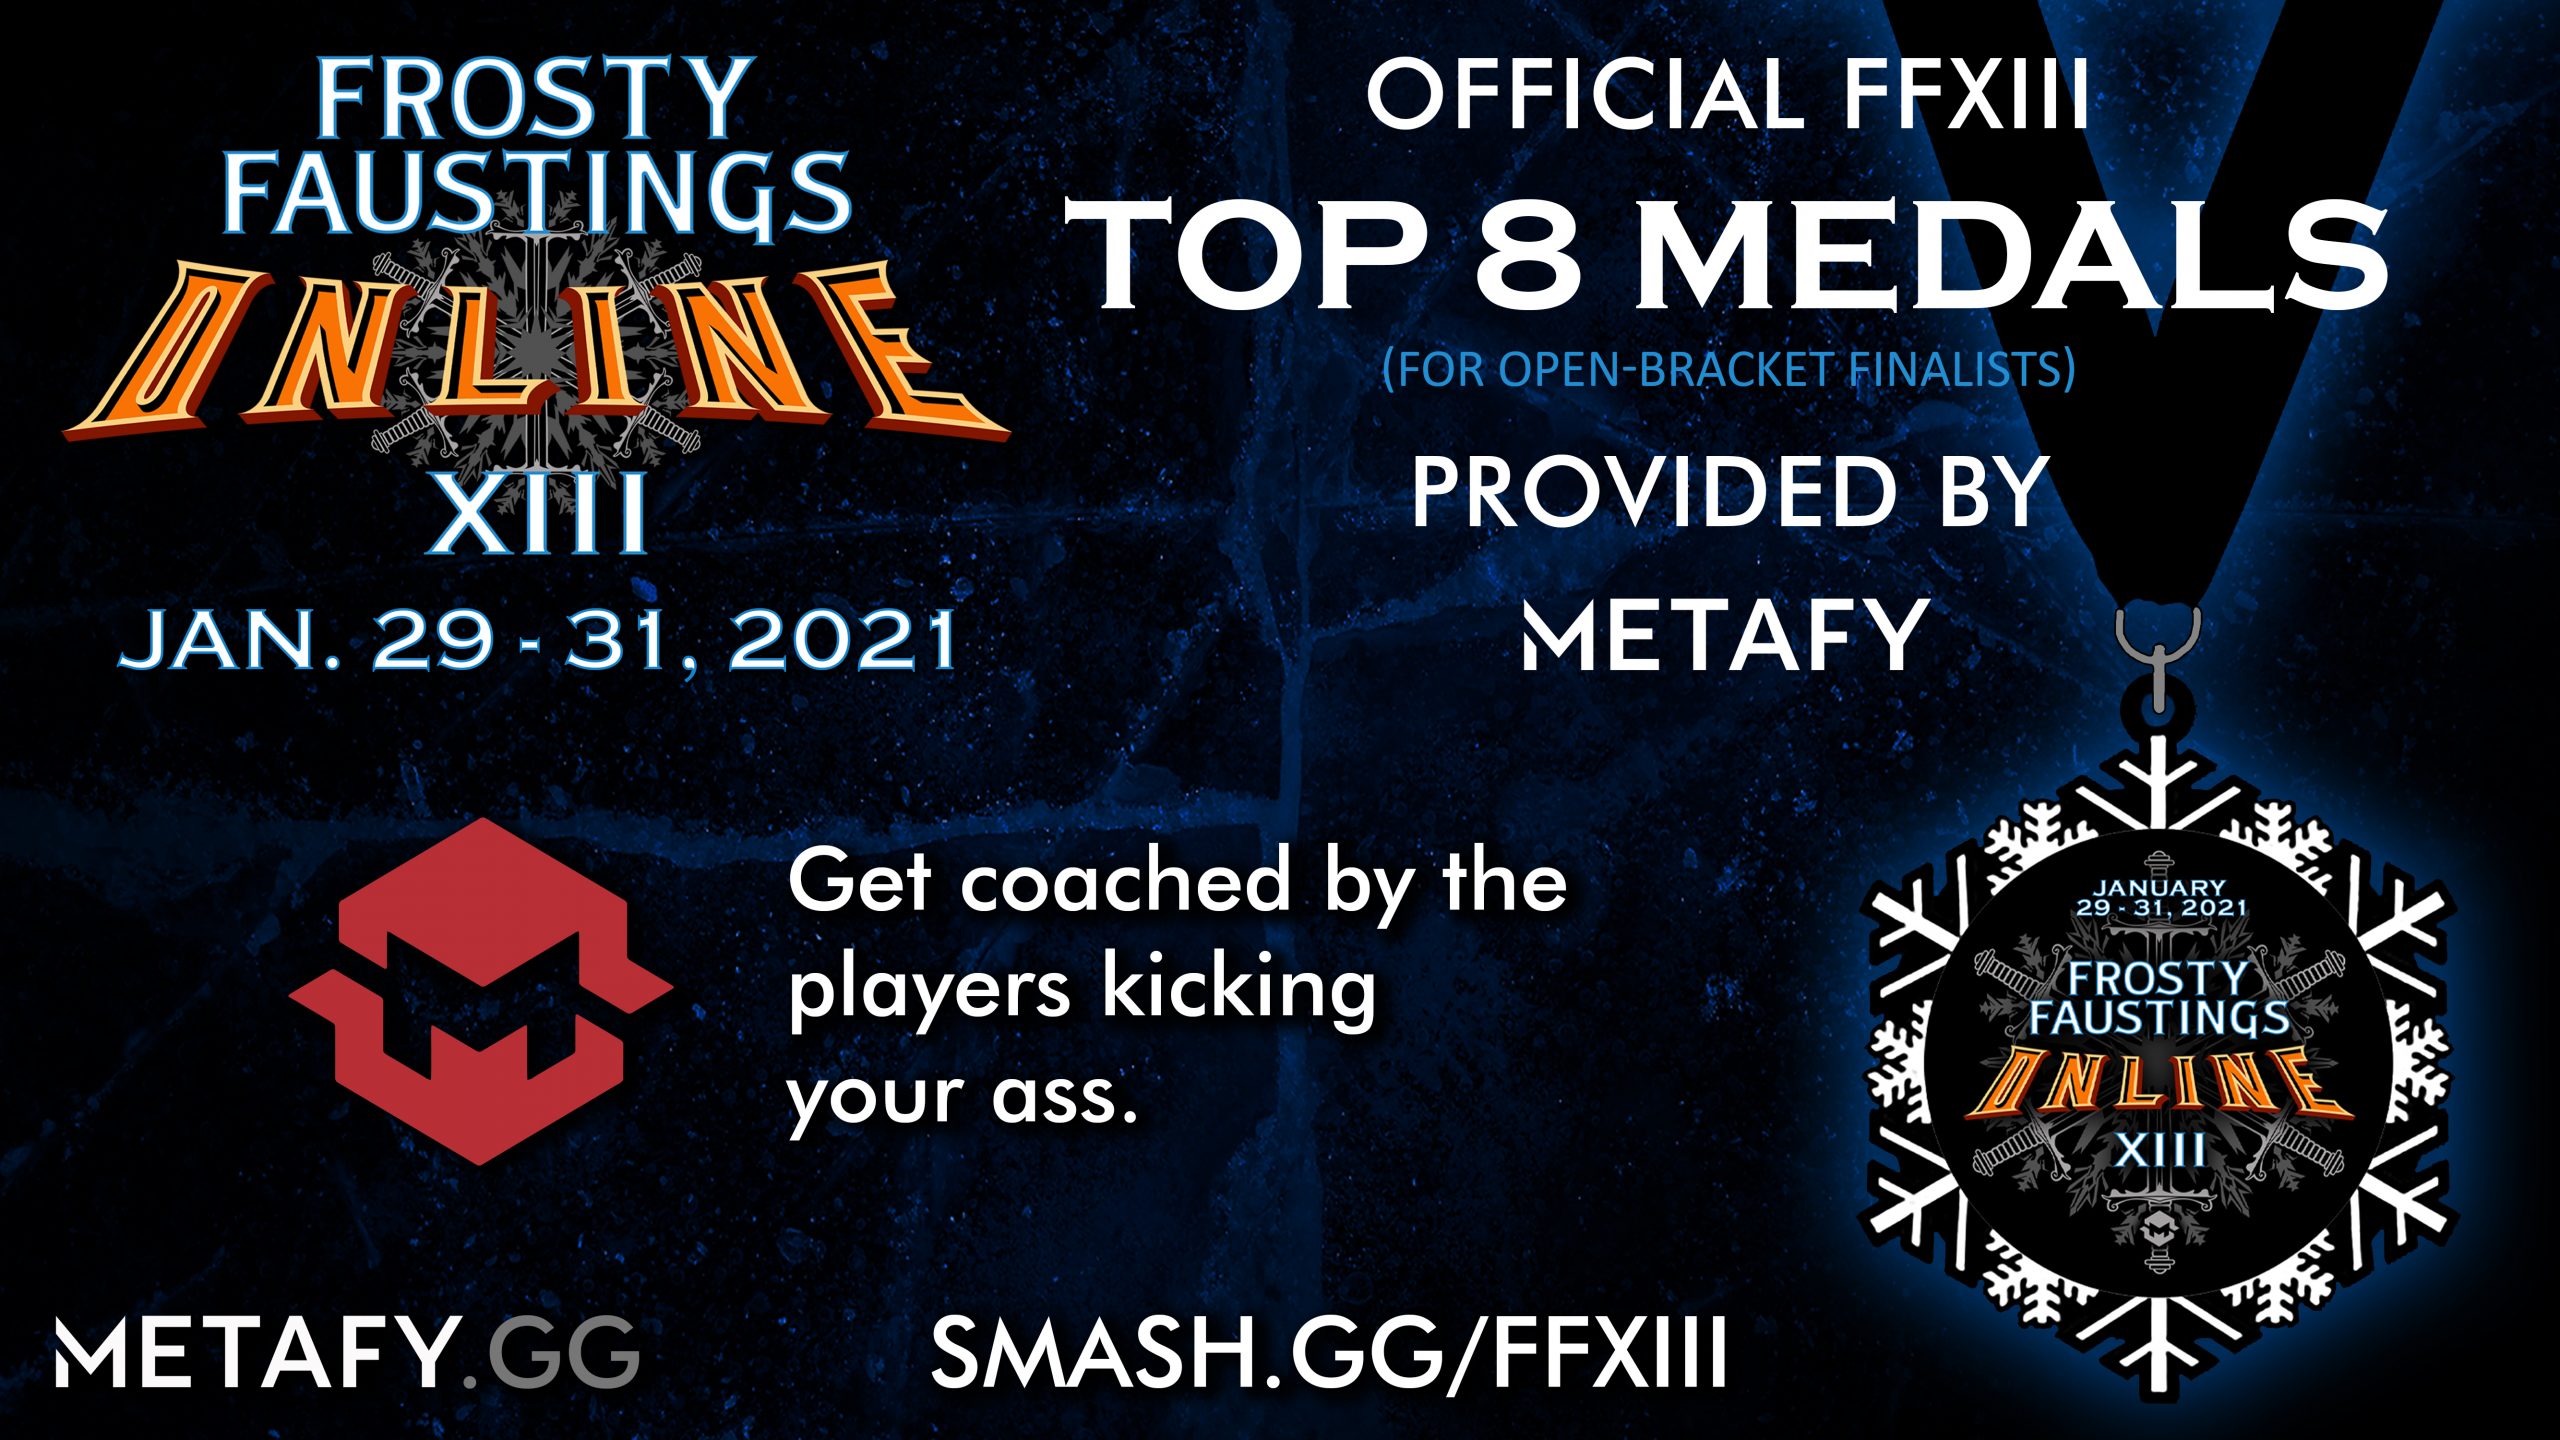 Metafy Supports Frosty Faustings XIII 2021 Online ...